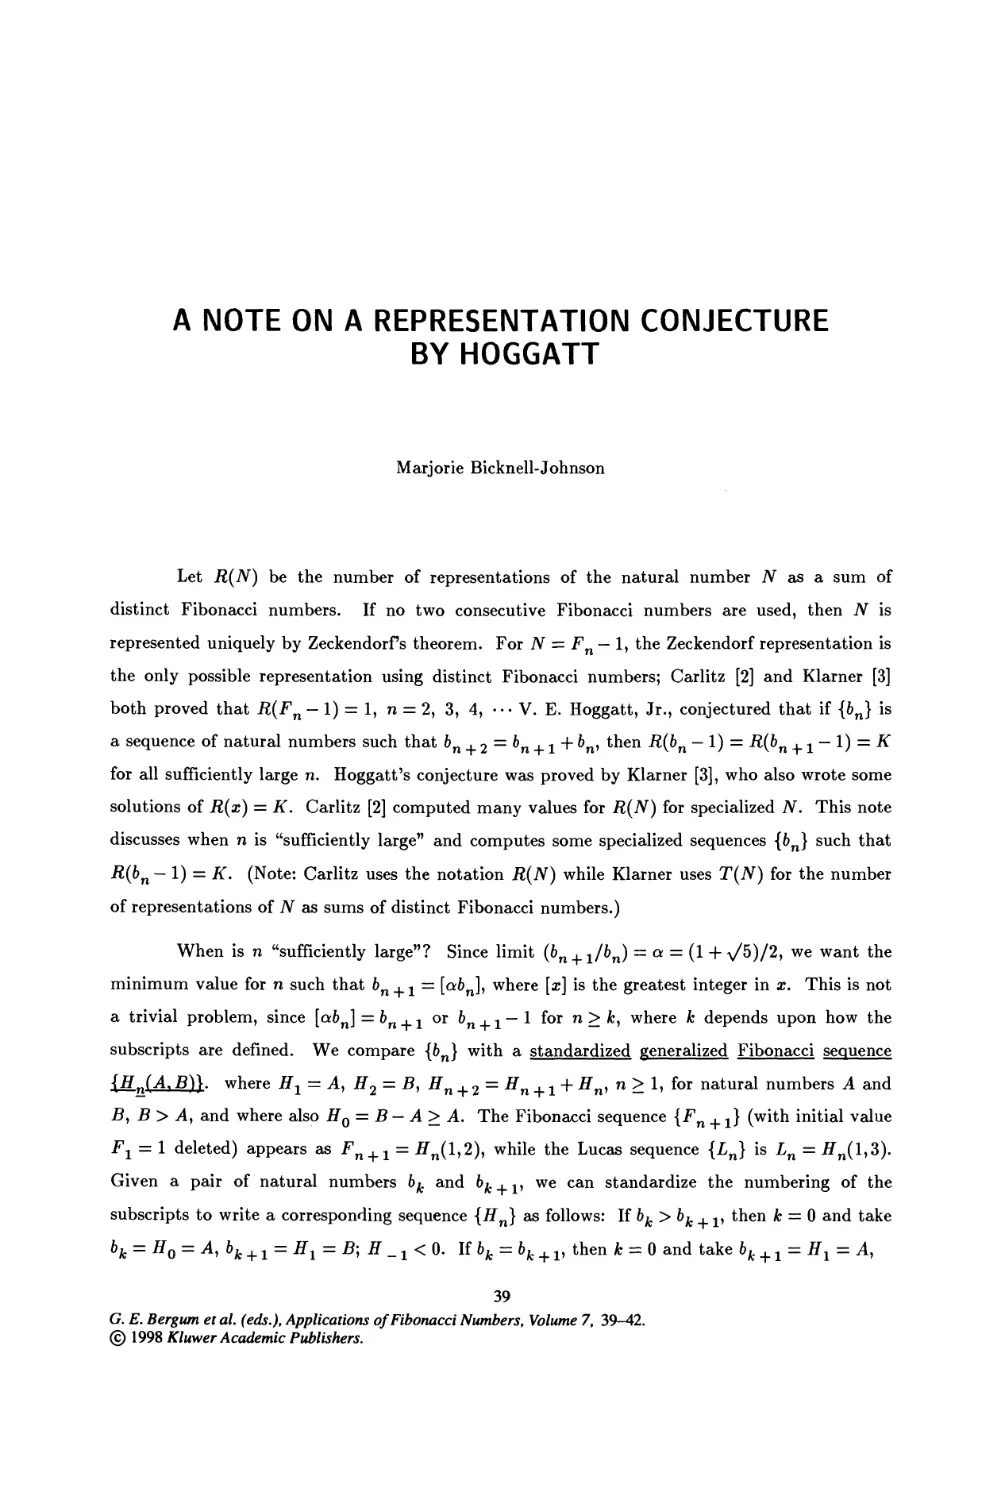 6. A Note on a Representation Conjecture By Hoggatt